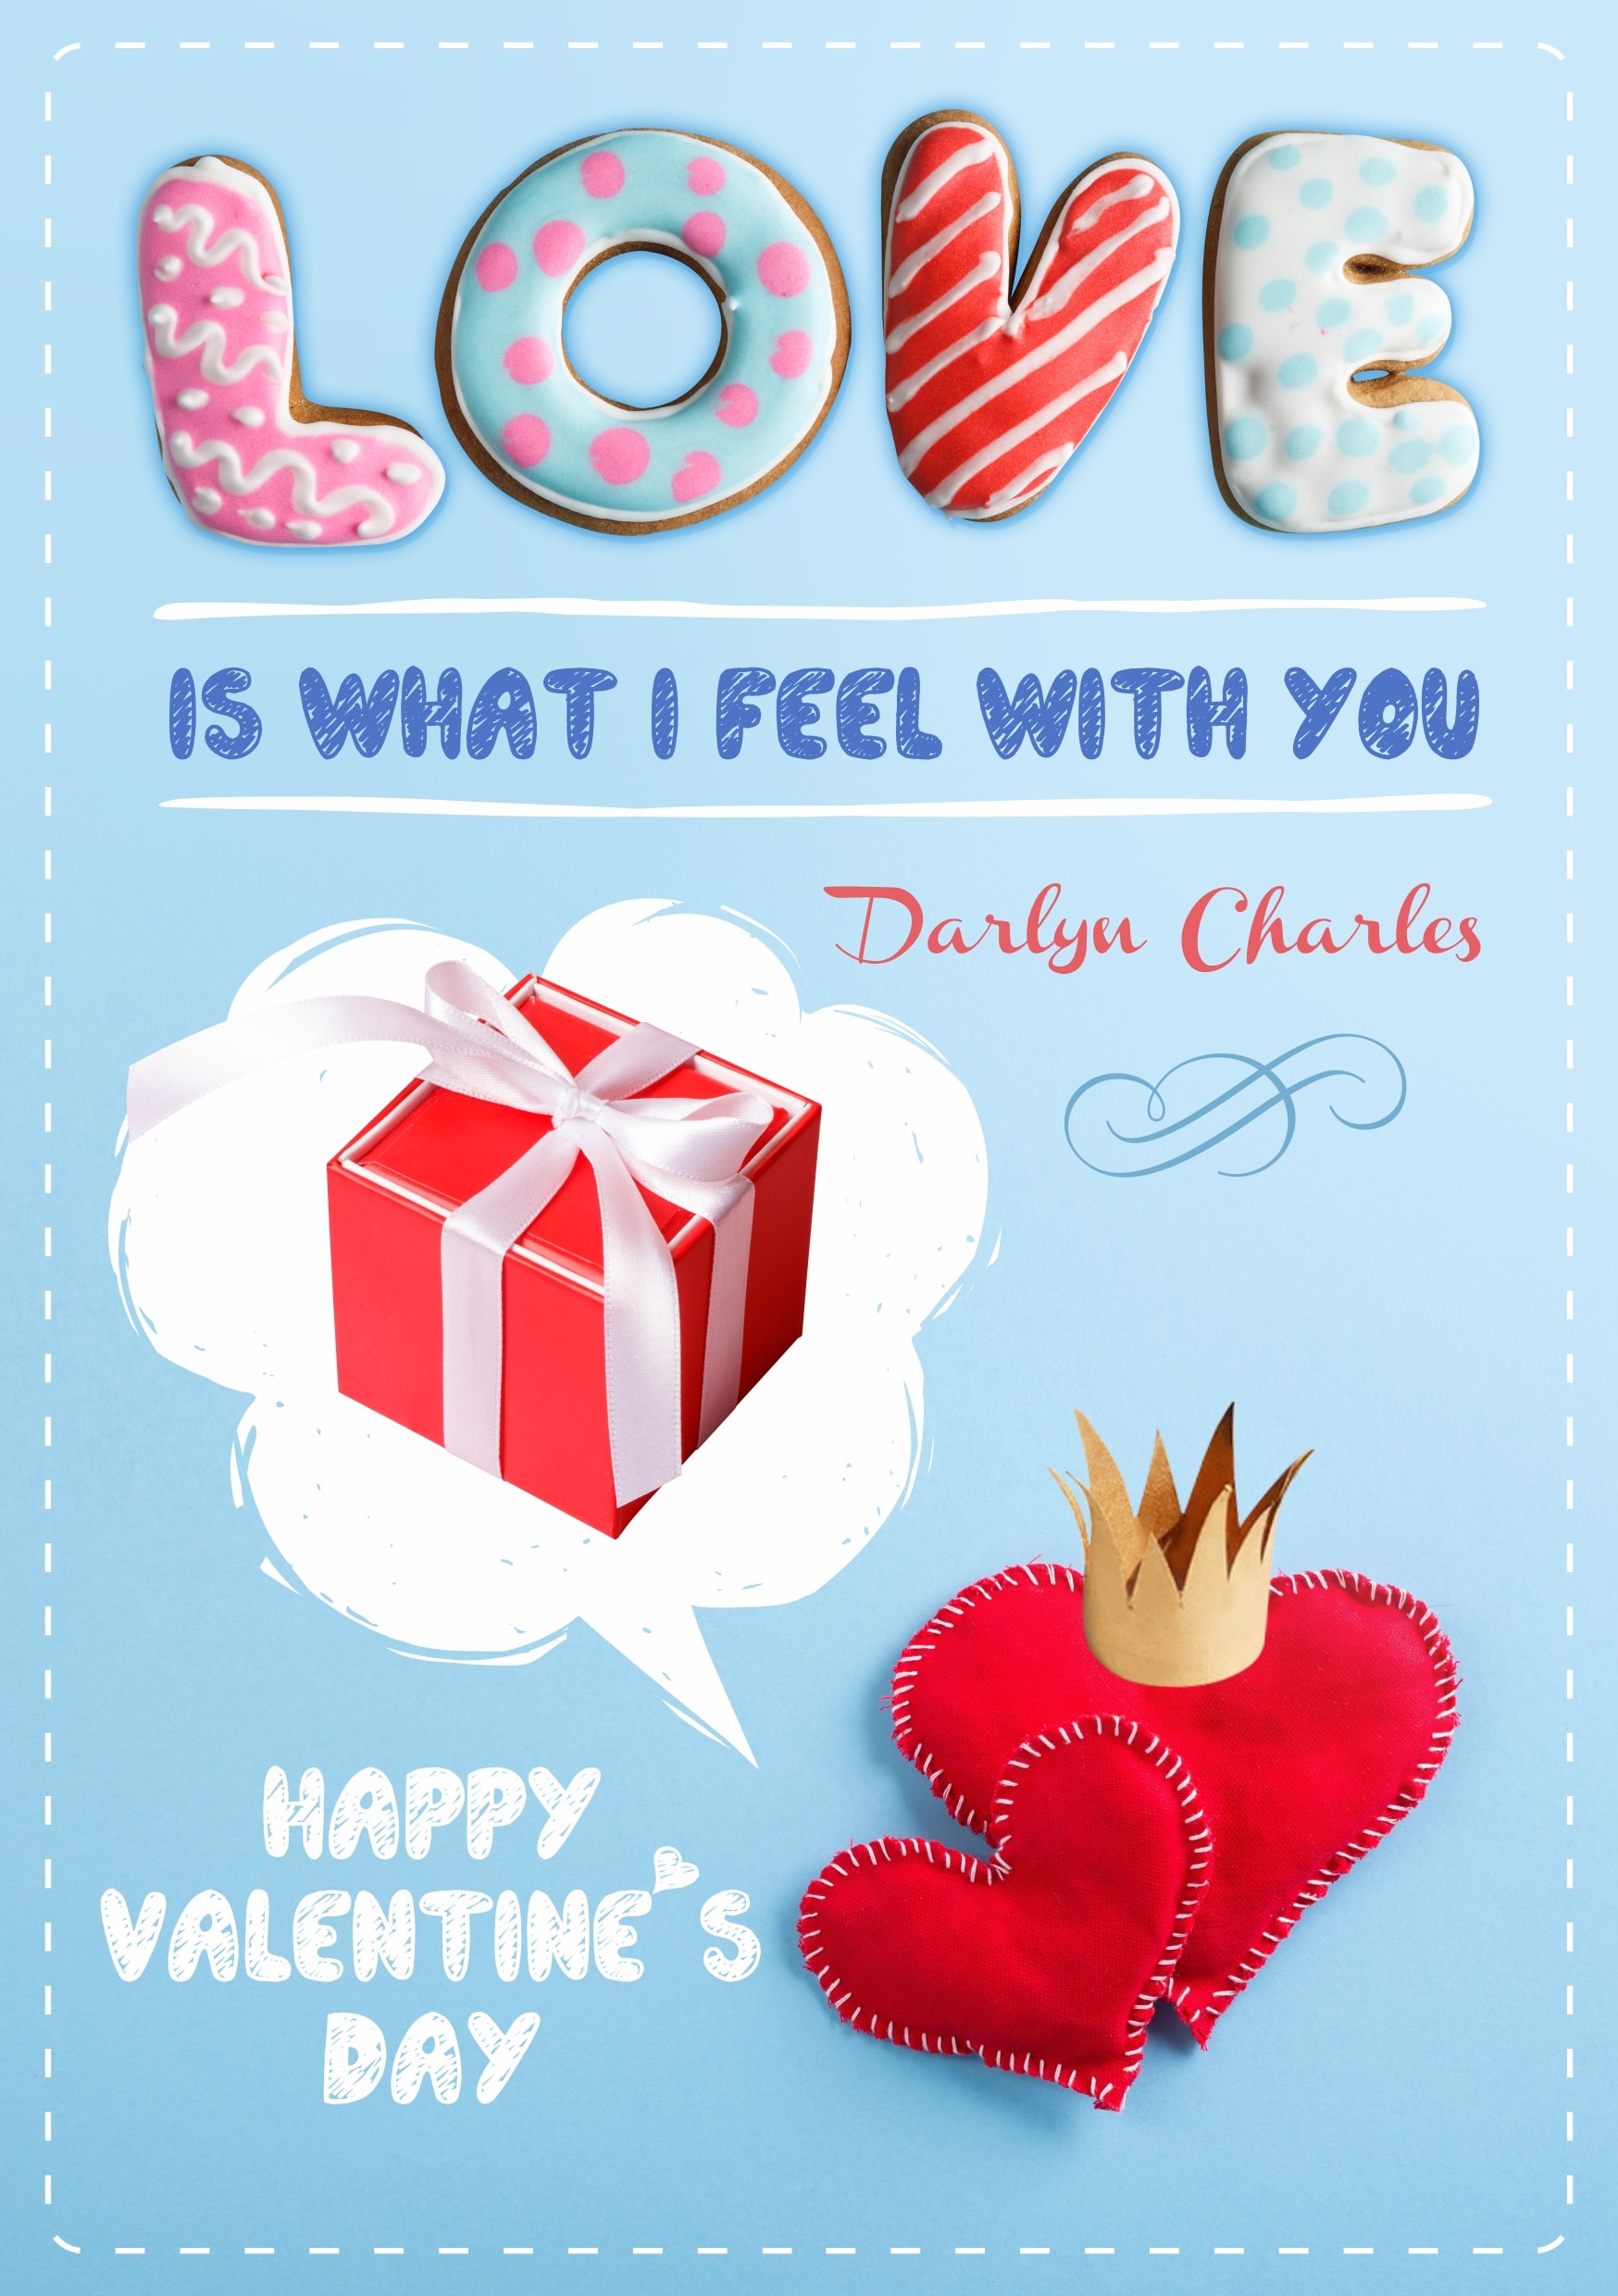 Blue Happy Valentine's Day greeting card 2021 (with editable text and animation) two red hearts, gift, colorful cookies inscription - Image